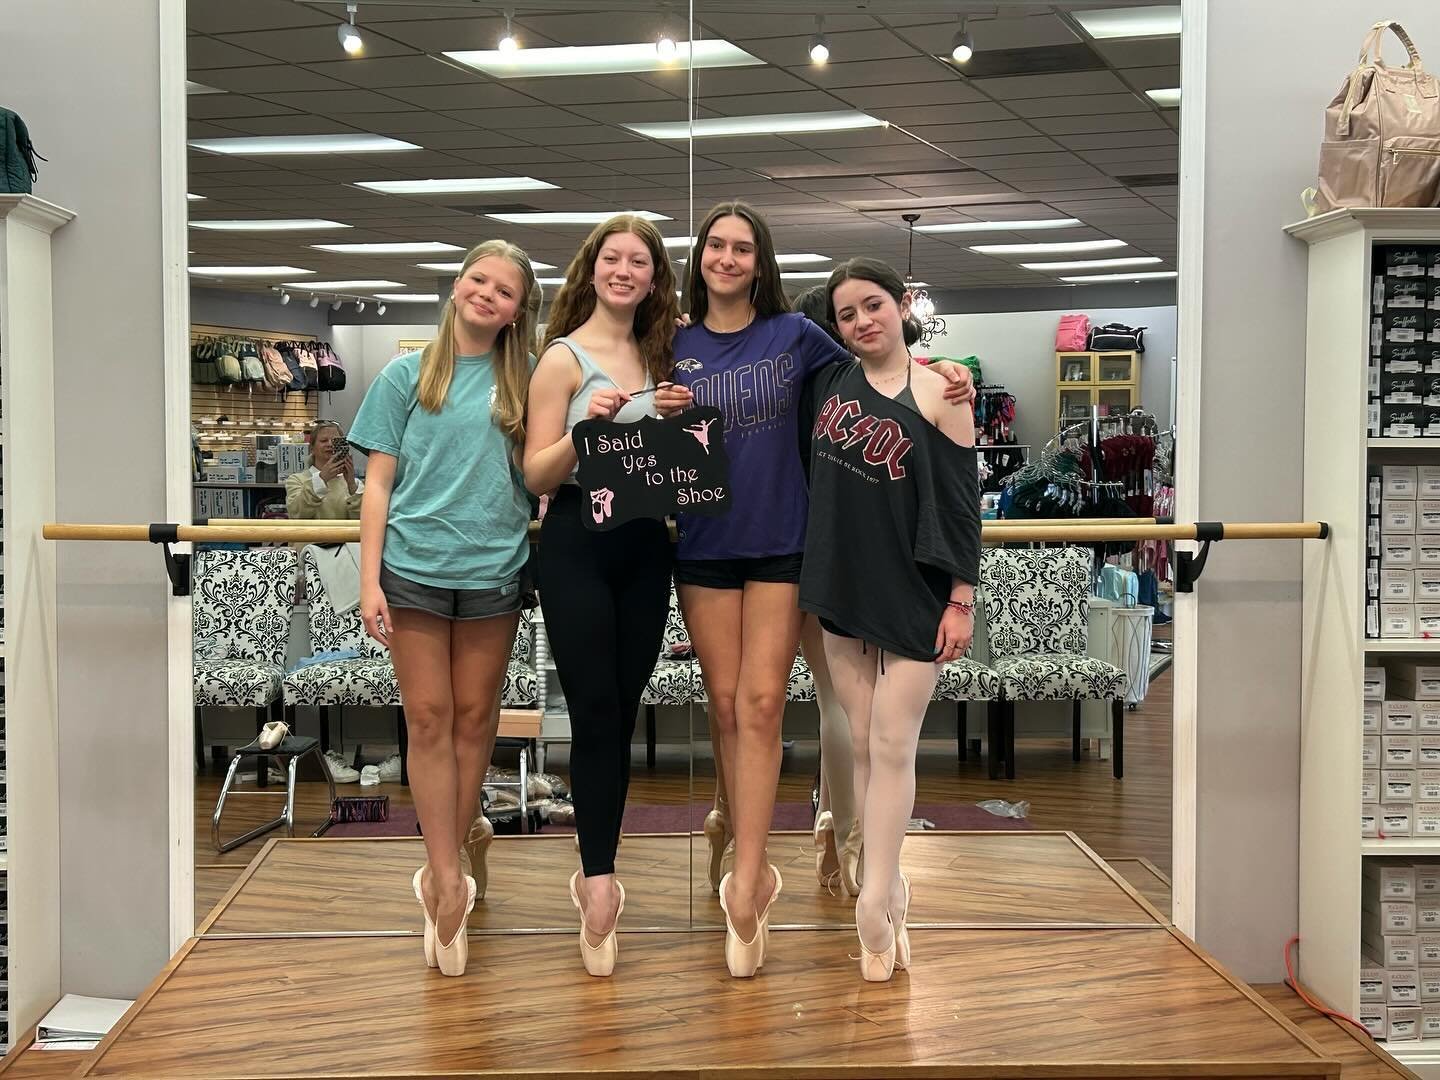 Congrats to these TMC Dancers who said &ldquo;yes&rdquo; to their first pair of pointe shoes 🩰💓